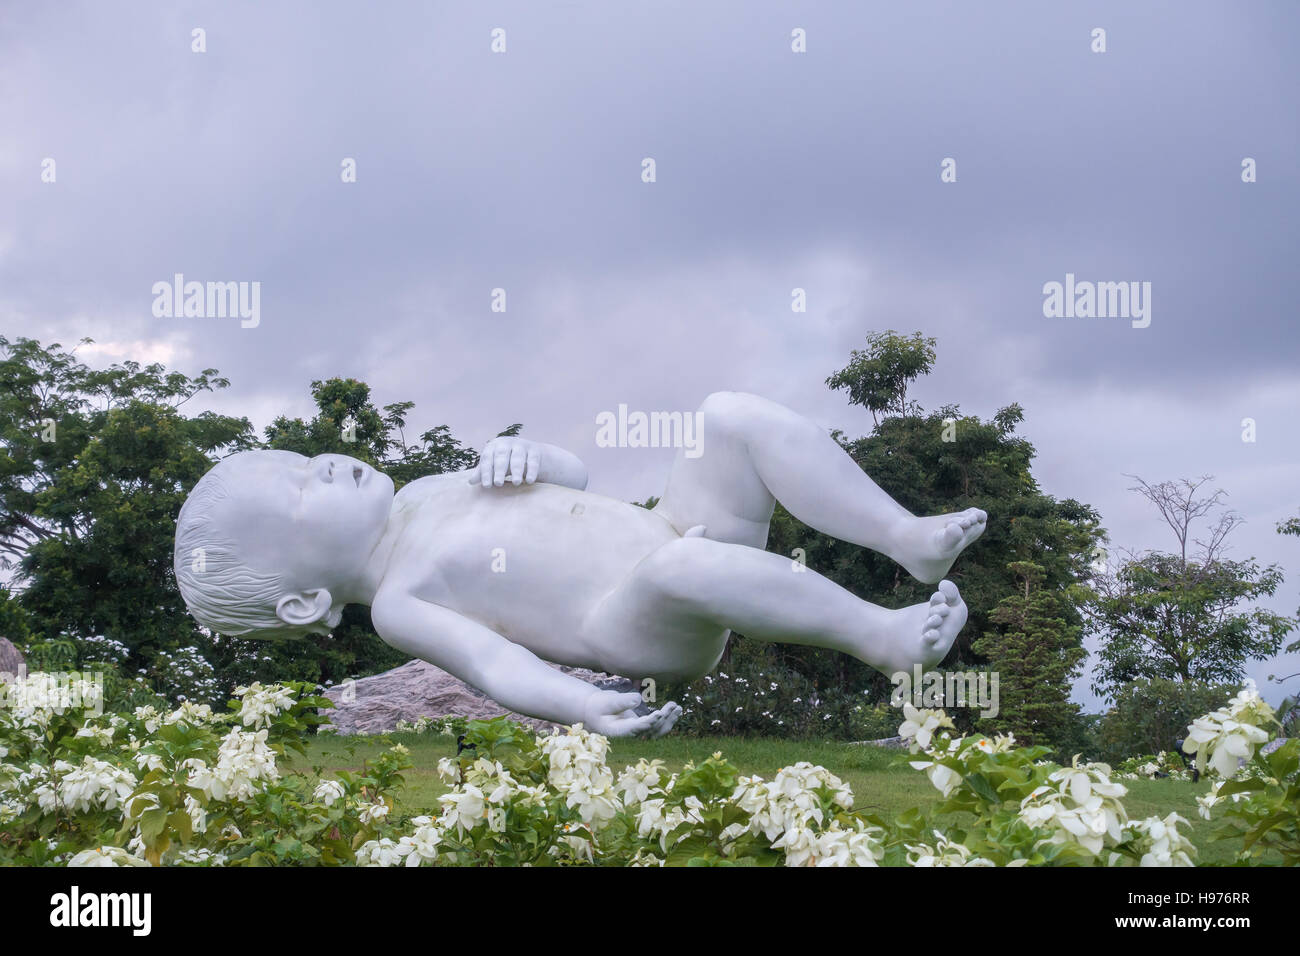 Unusual statue of a baby laying down on its back in a public park in Singapore Stock Photo